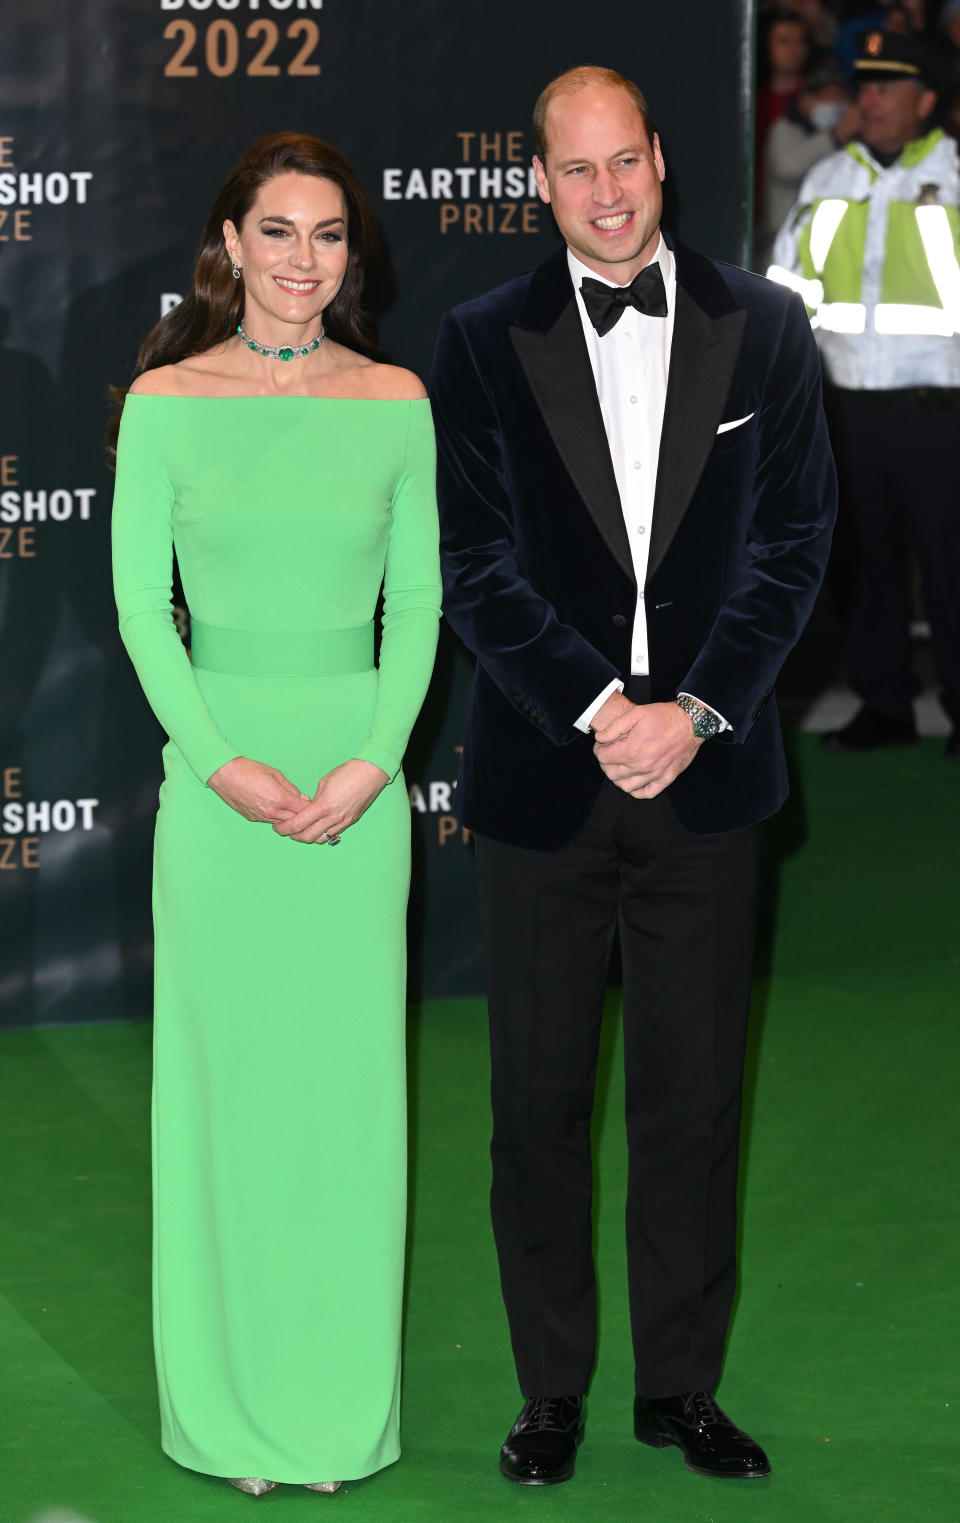 Britain's Prince William, Prince of Wales, and Catherine, Princess of Wales, attend the 2022 Earthshot Prize ceremony.